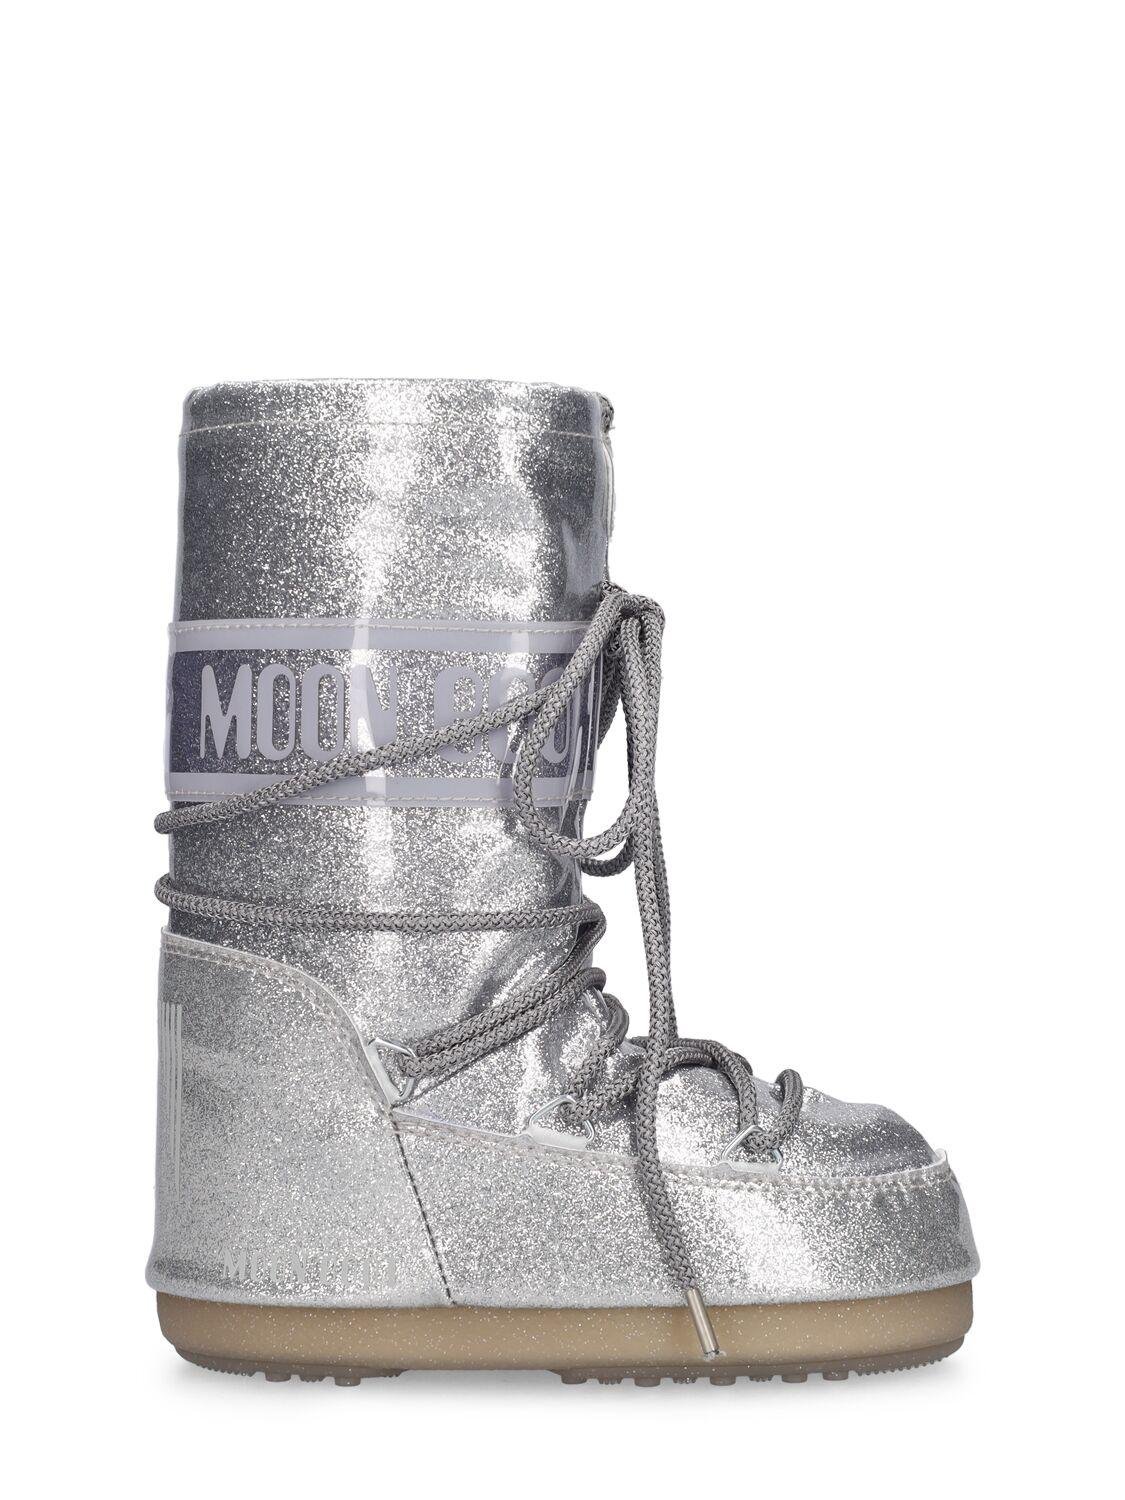 Icon Tall Glitter Nylon Snow Boots by MOON BOOT